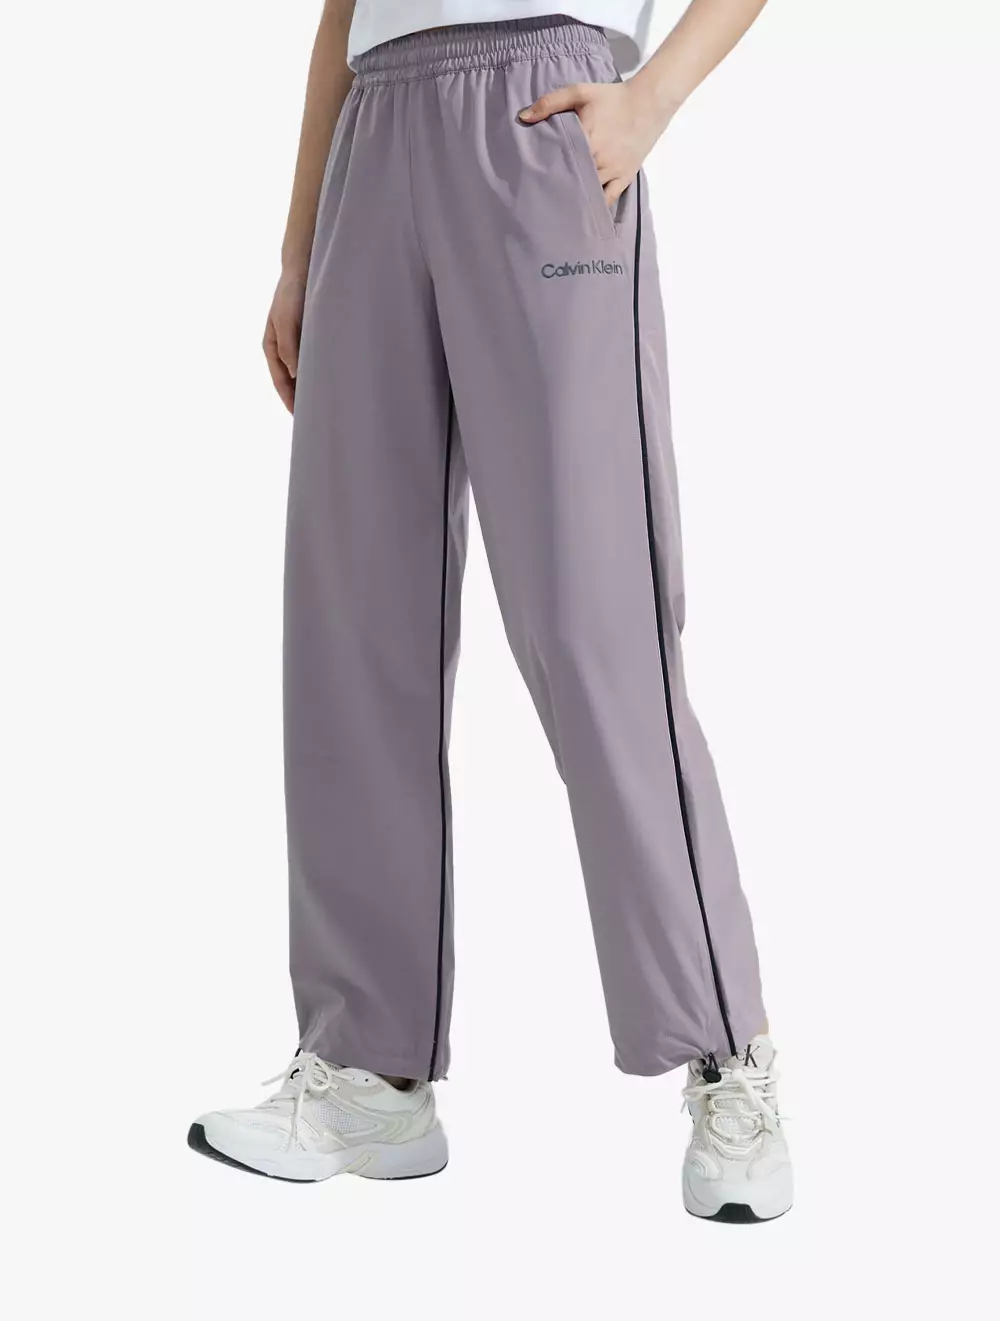 Calvin Klein Quick Dry Athletic Pants for Women